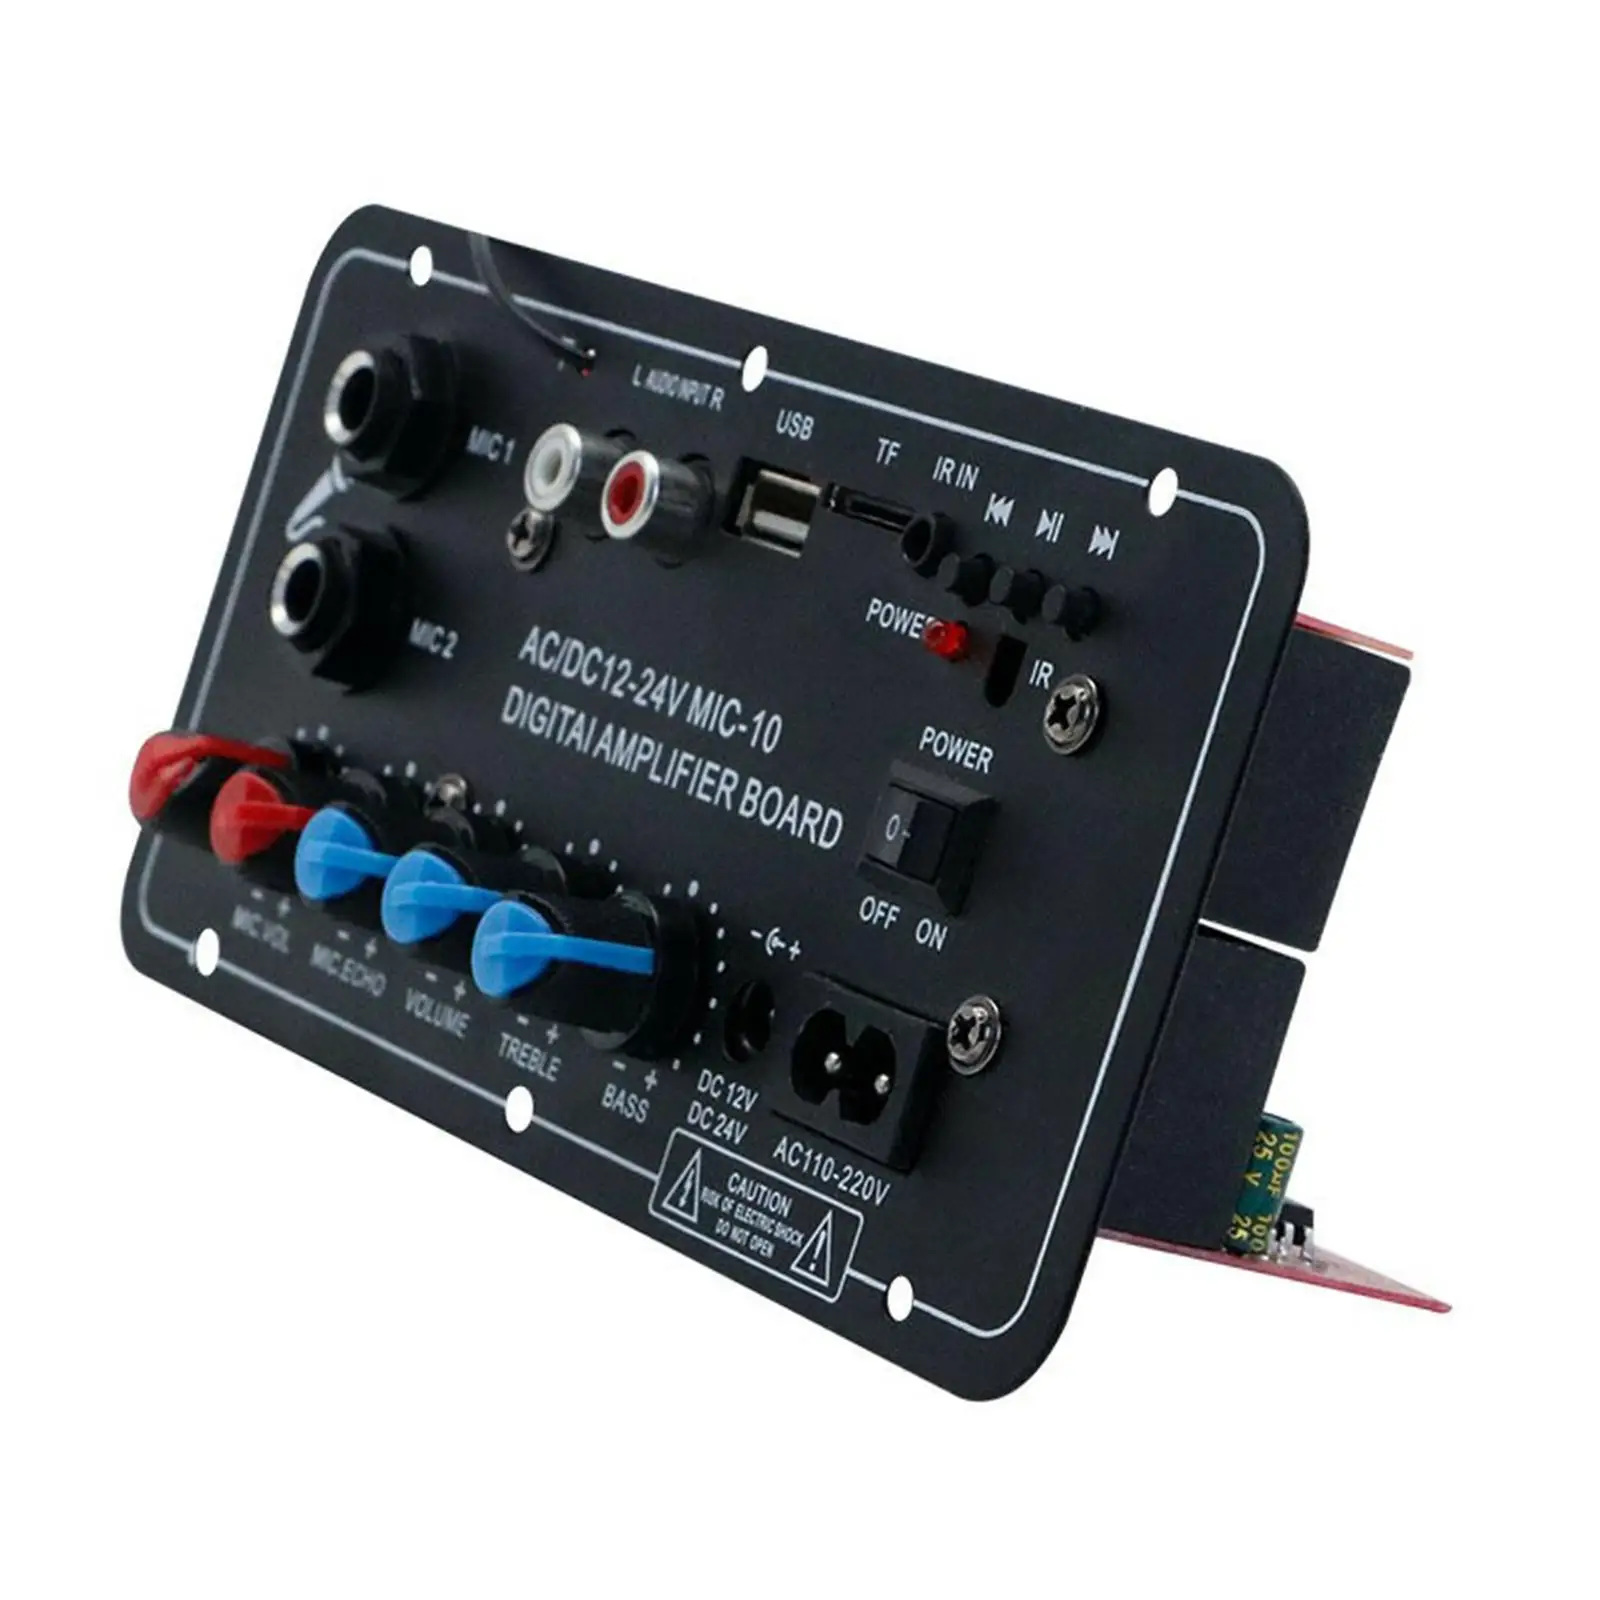 Amplifier Board Mono Channel with Treble and Bass Control Audio Module for DIY Speakers Home Audio Theater Speakers Car Karaoke